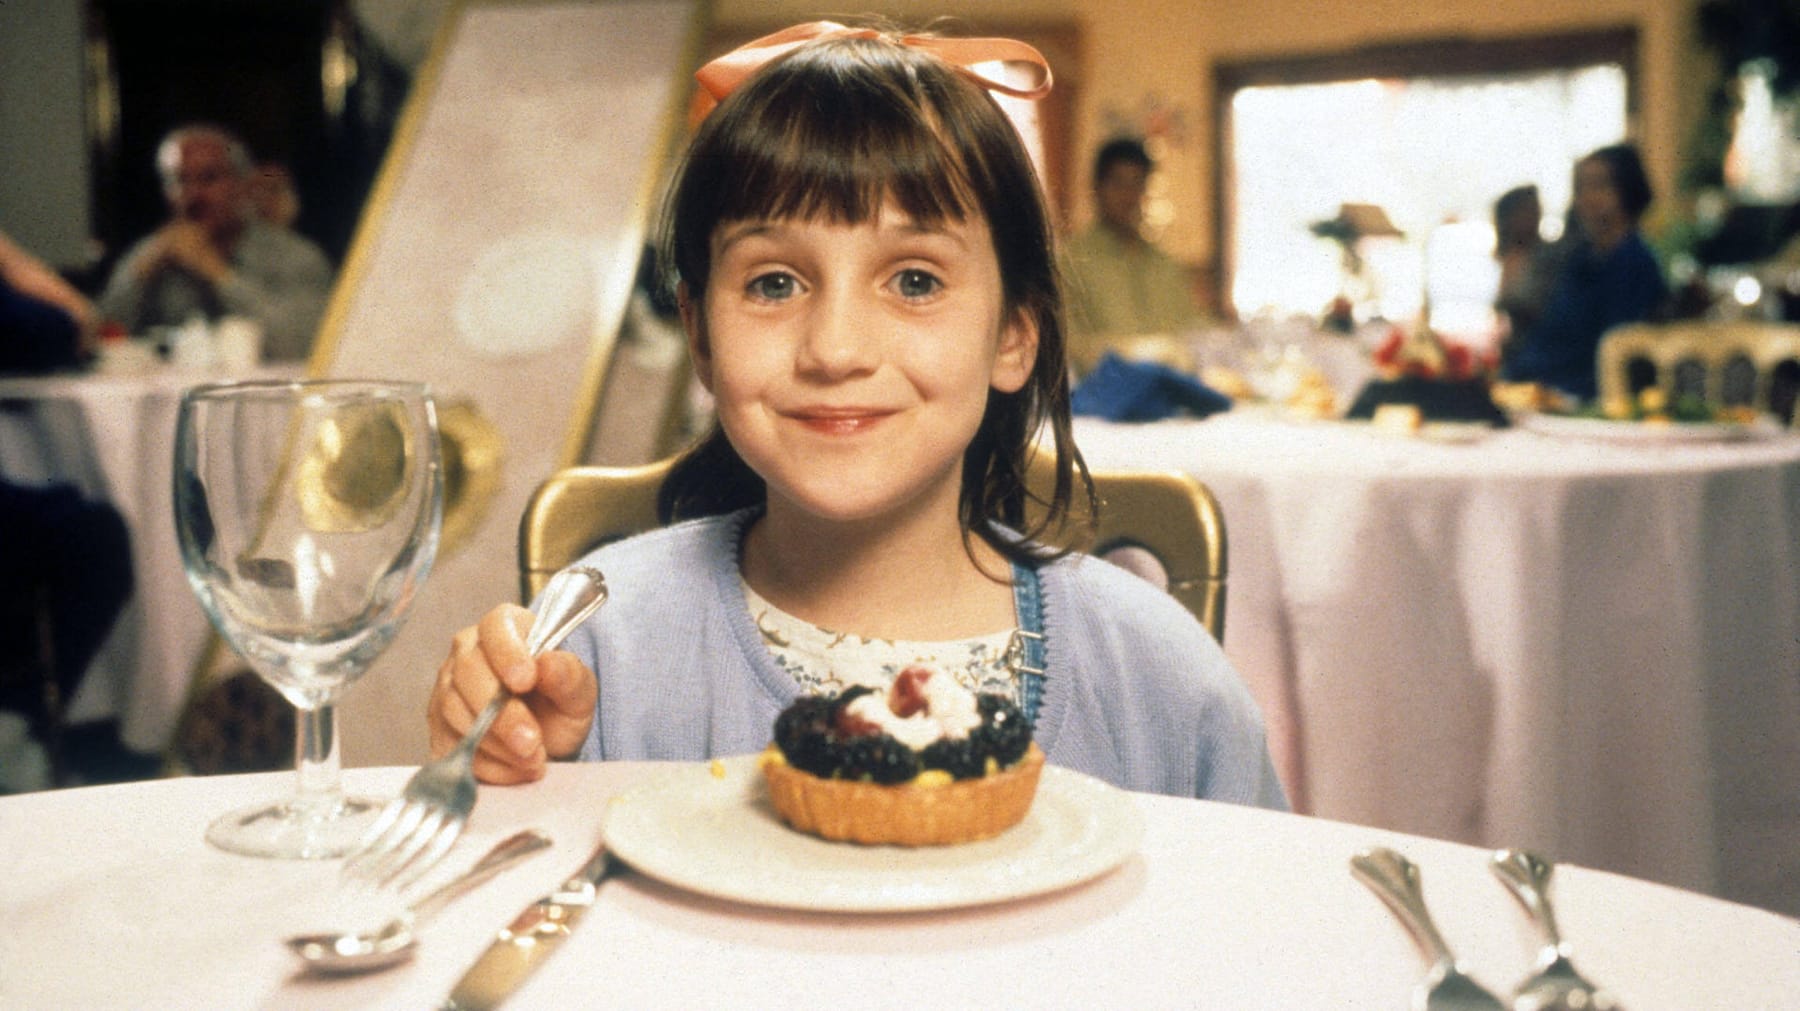 That S What Happened To Little Matilda Celebrity Gossip News